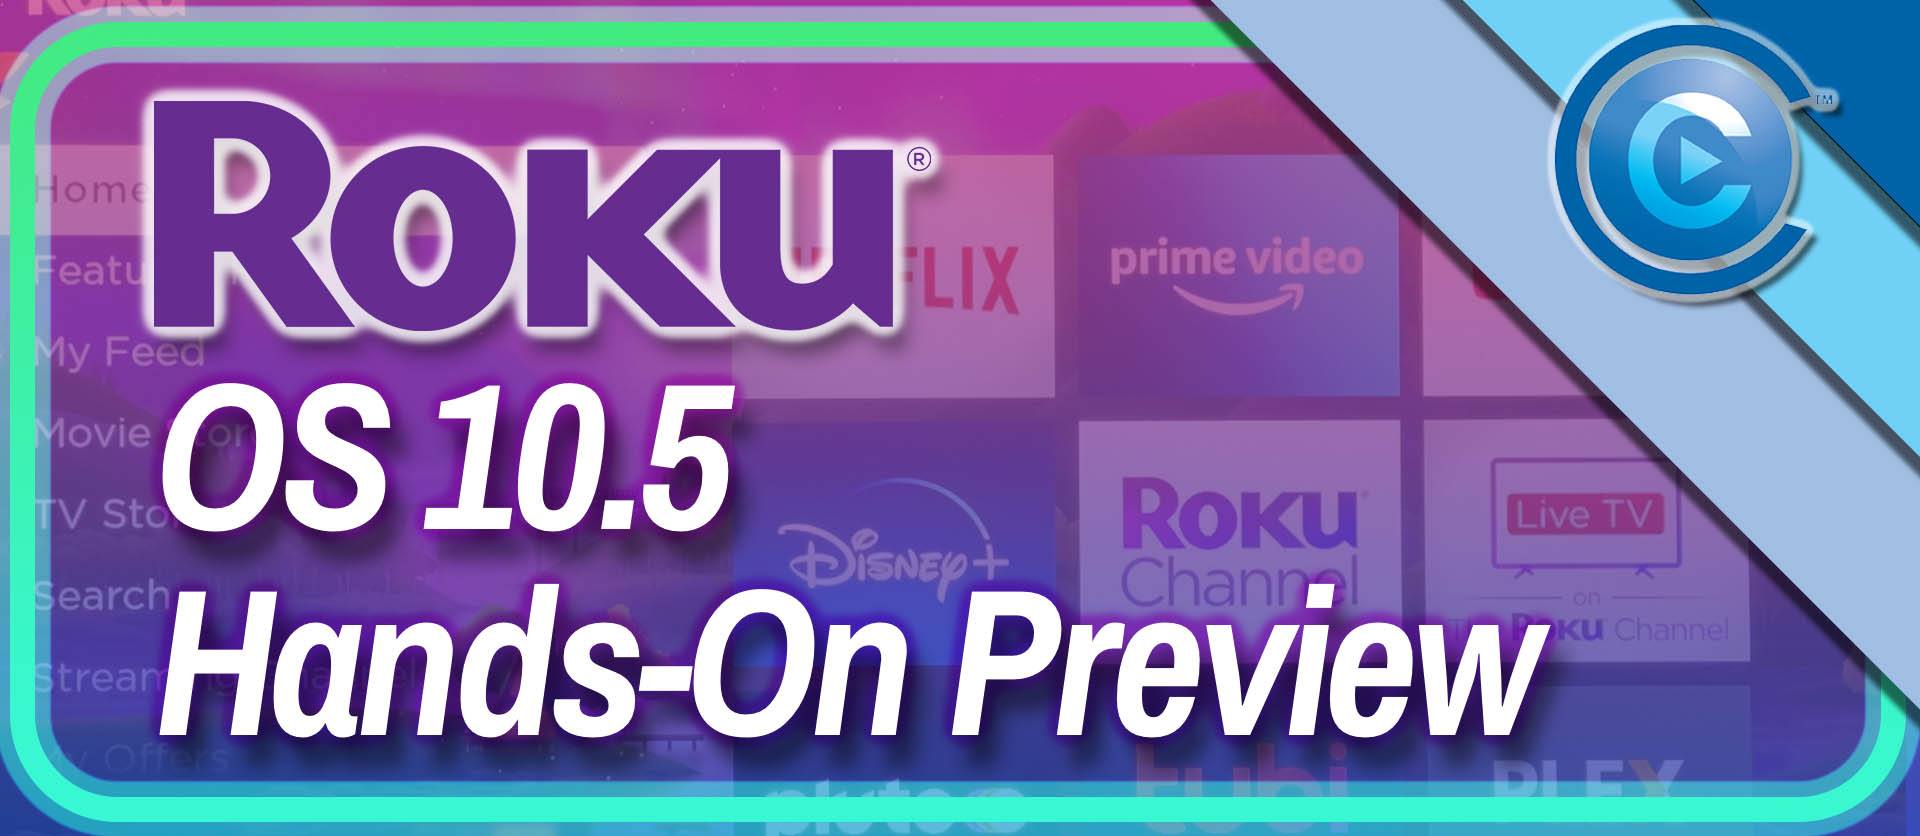 Video: Hands-On with Roku OS 10.5: Exploring New Features, Testing Performance, and More